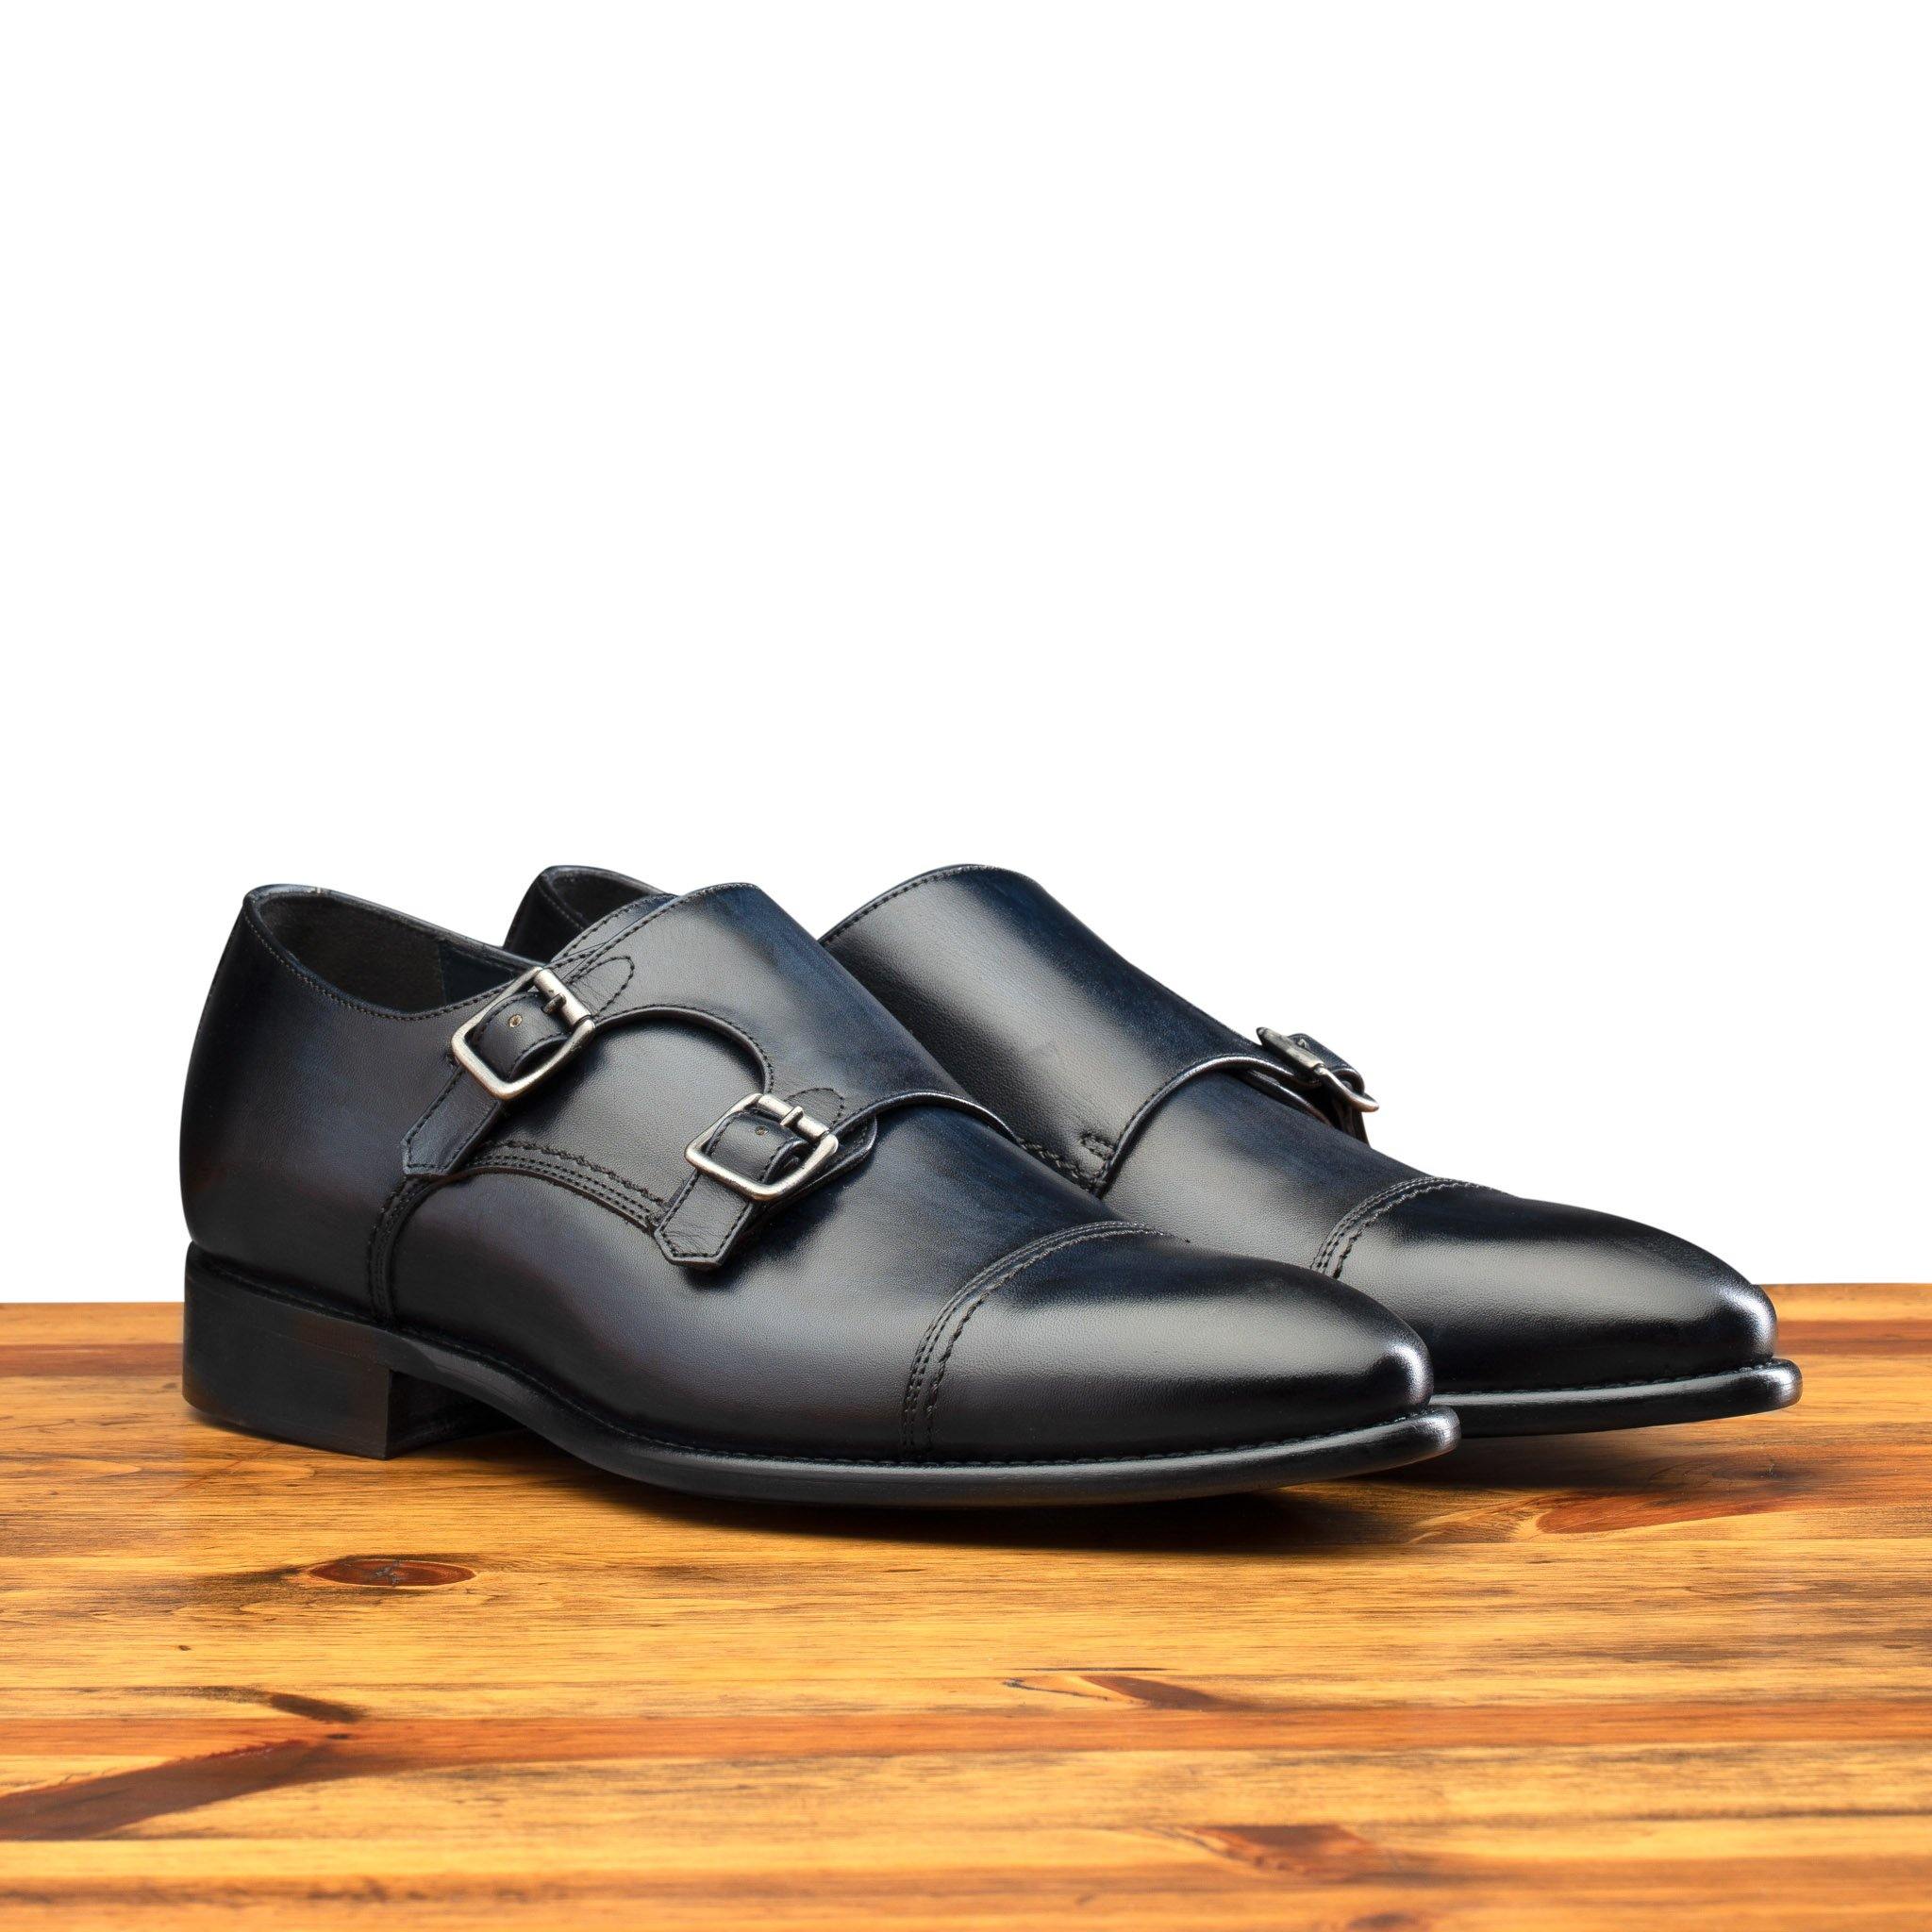 Pair of 6582 Calzoleria Toscana Blue Monkstrap Cap Toe on top of a wooden table